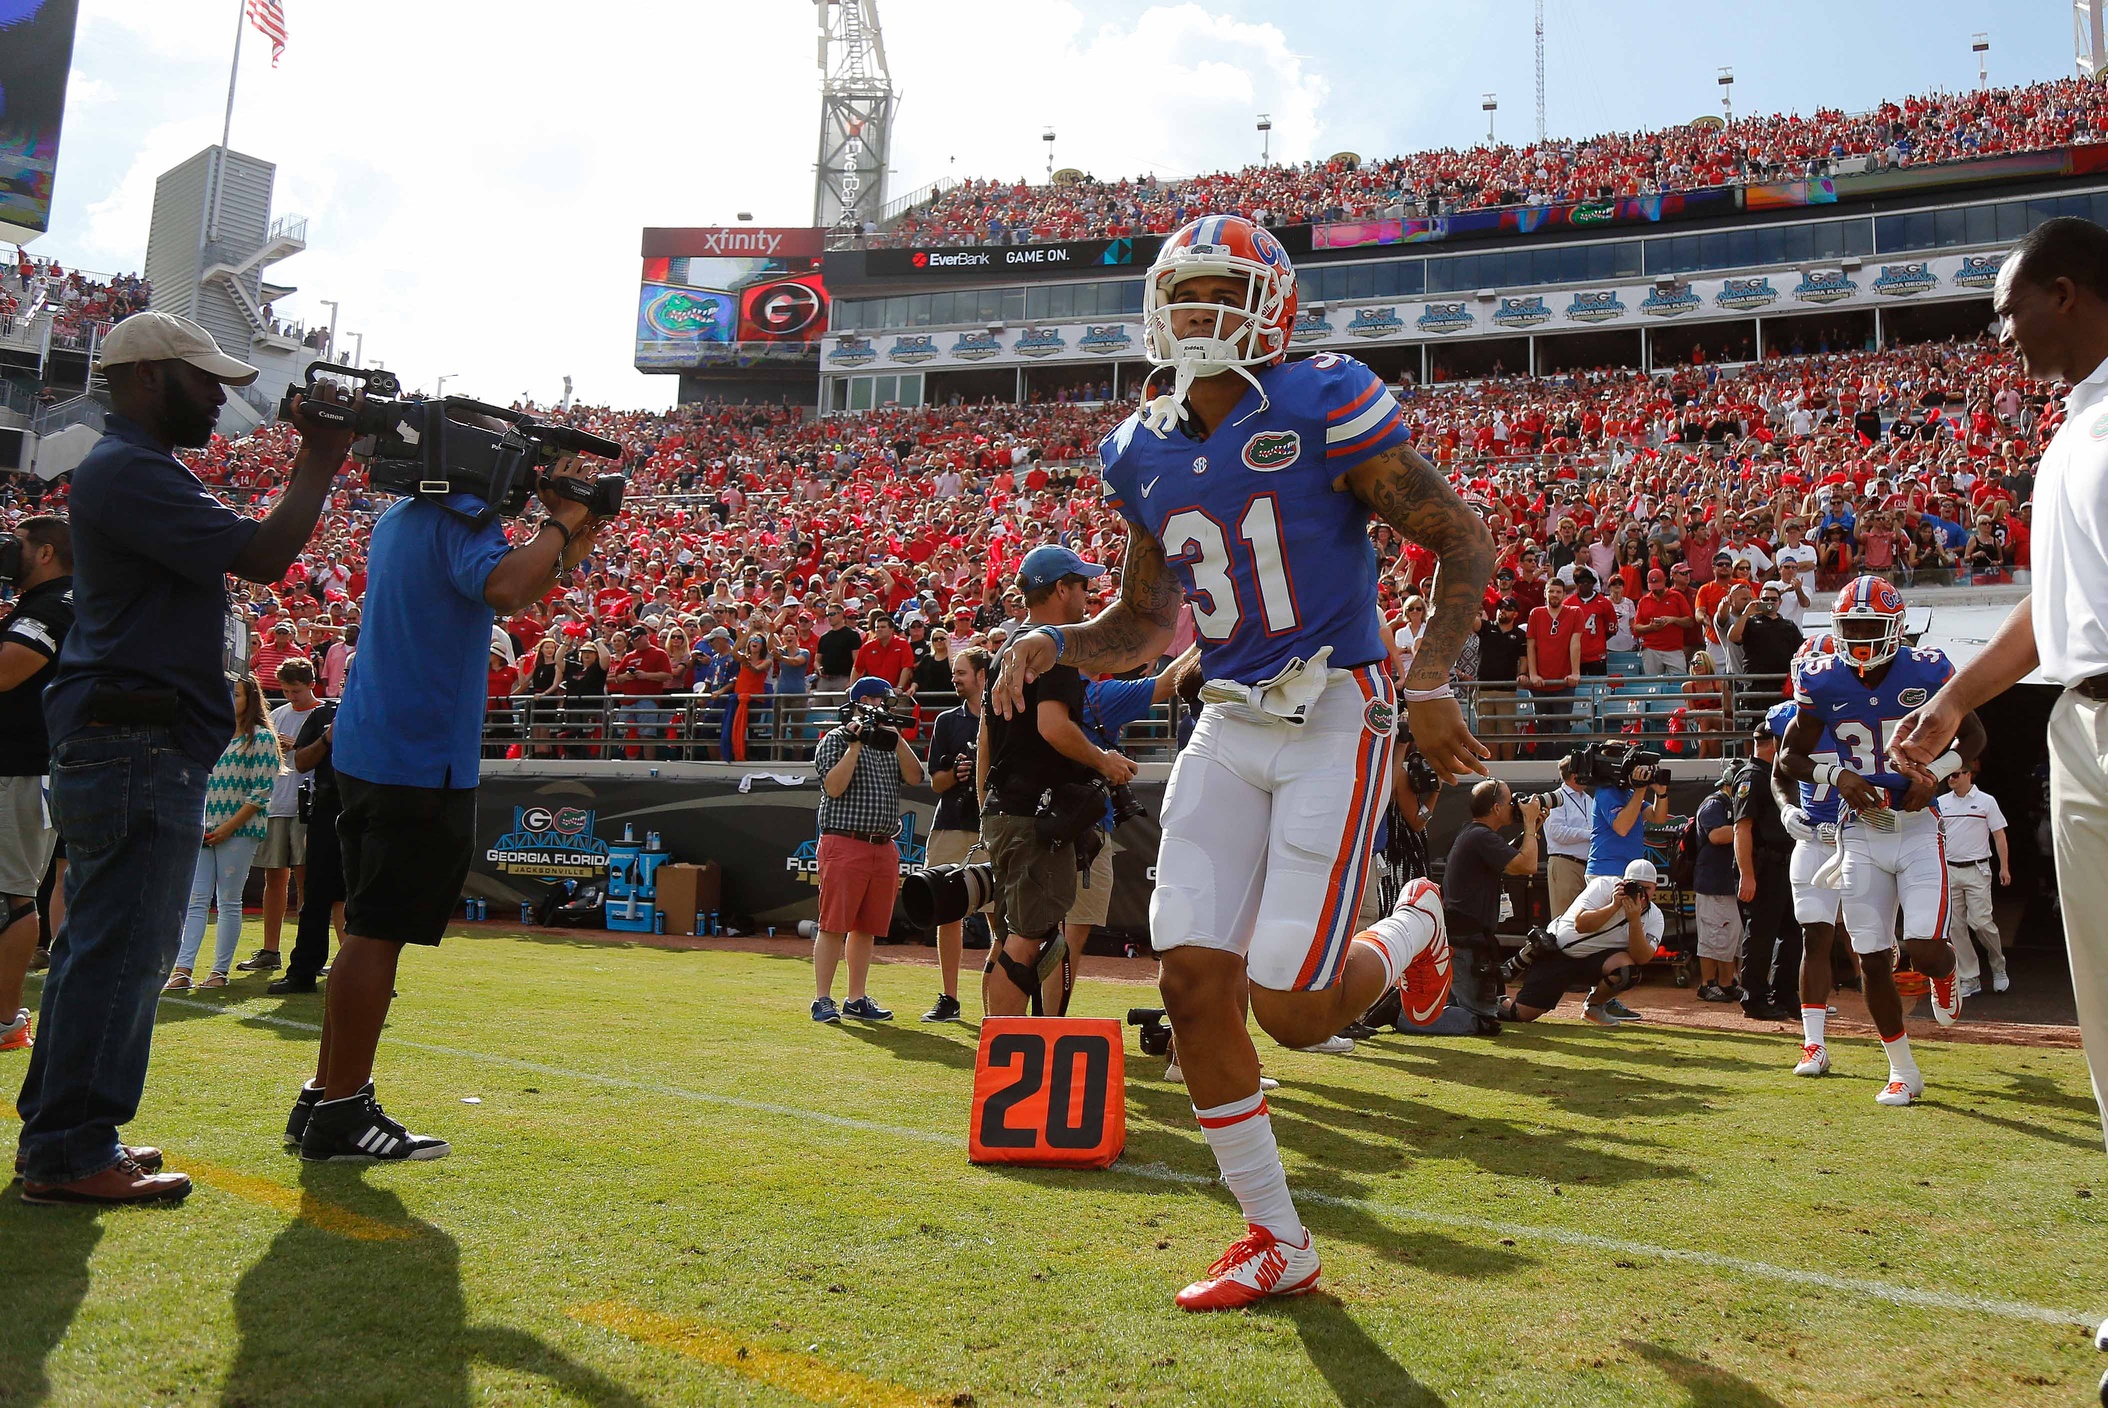 Oct 29, 2016; Jacksonville, FL, USA; Florida Gators defensive back Teez Tabor (31) and teammates run out of the tunnel before the game against the Georgia Bulldogs at EverBank Field. Mandatory Credit: Kim Klement-USA TODAY Sports